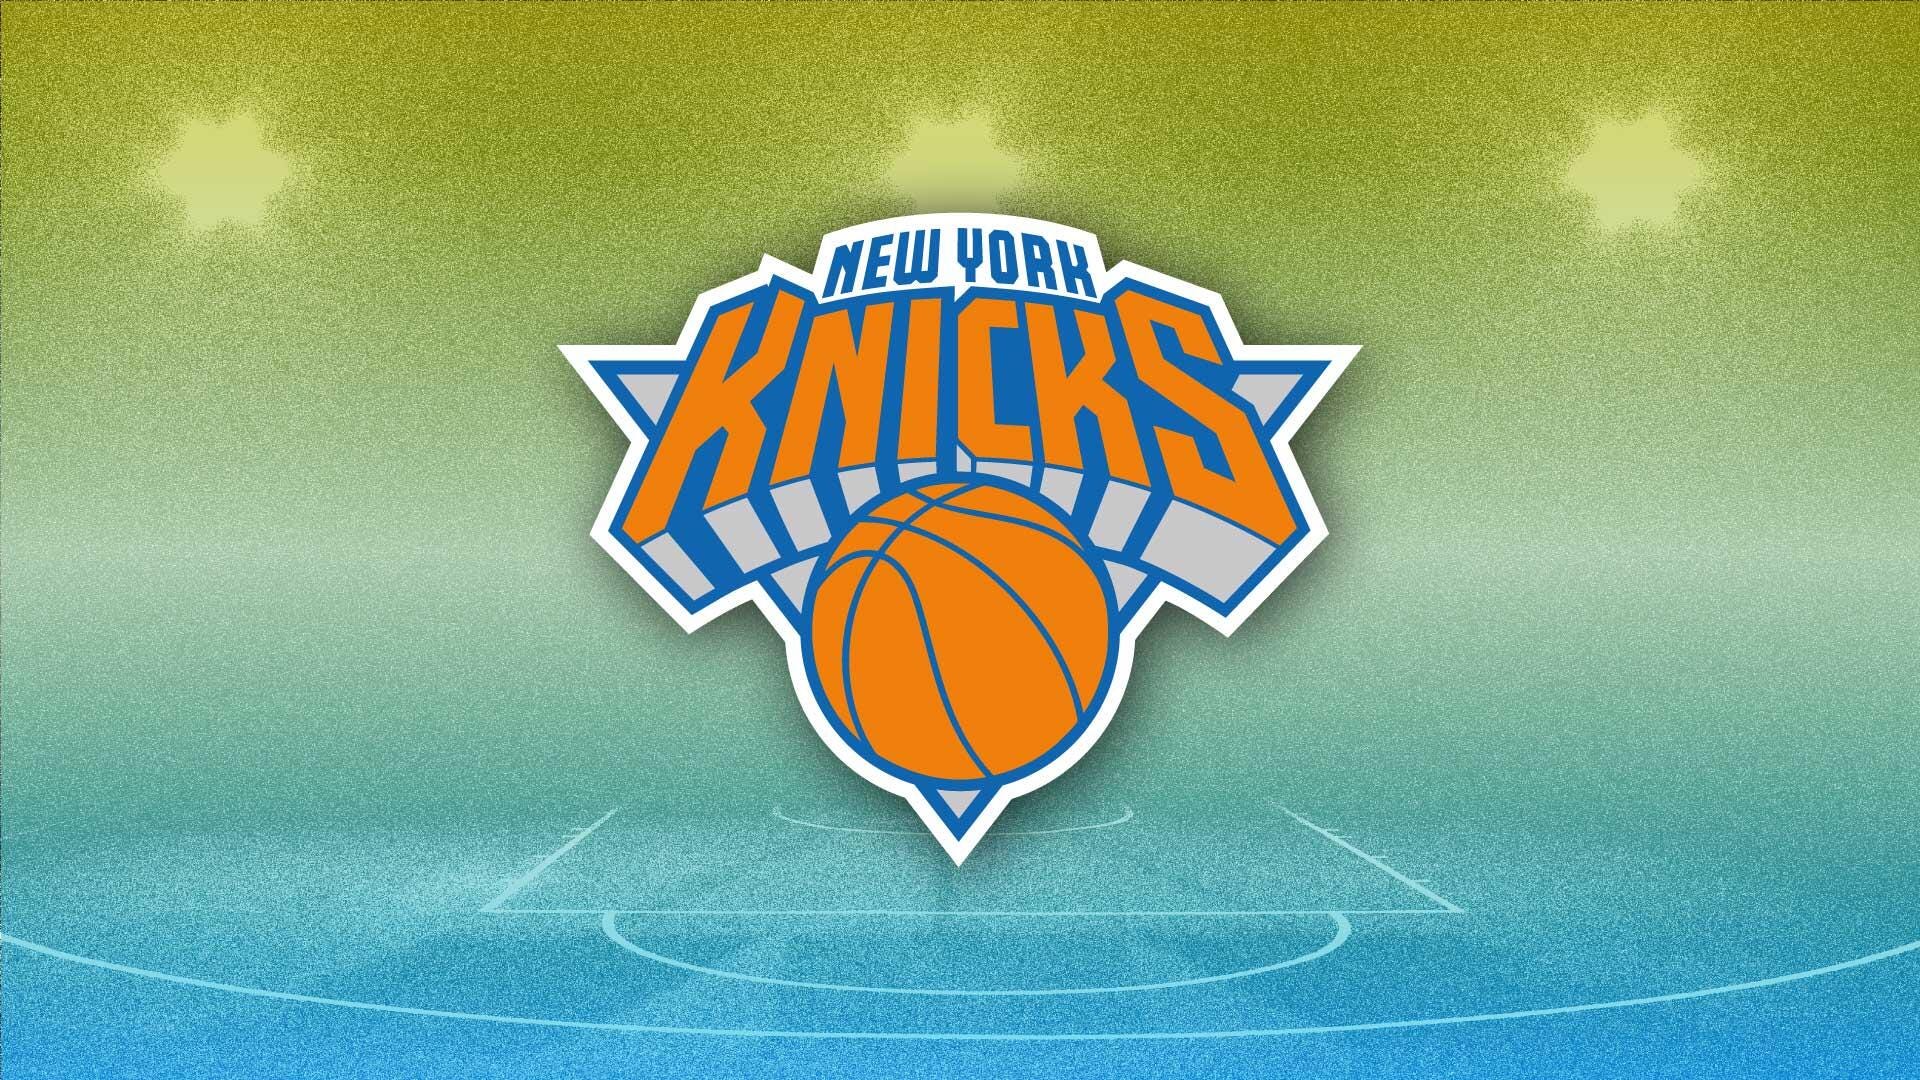 How to Watch the New York Knicks Live in 2022